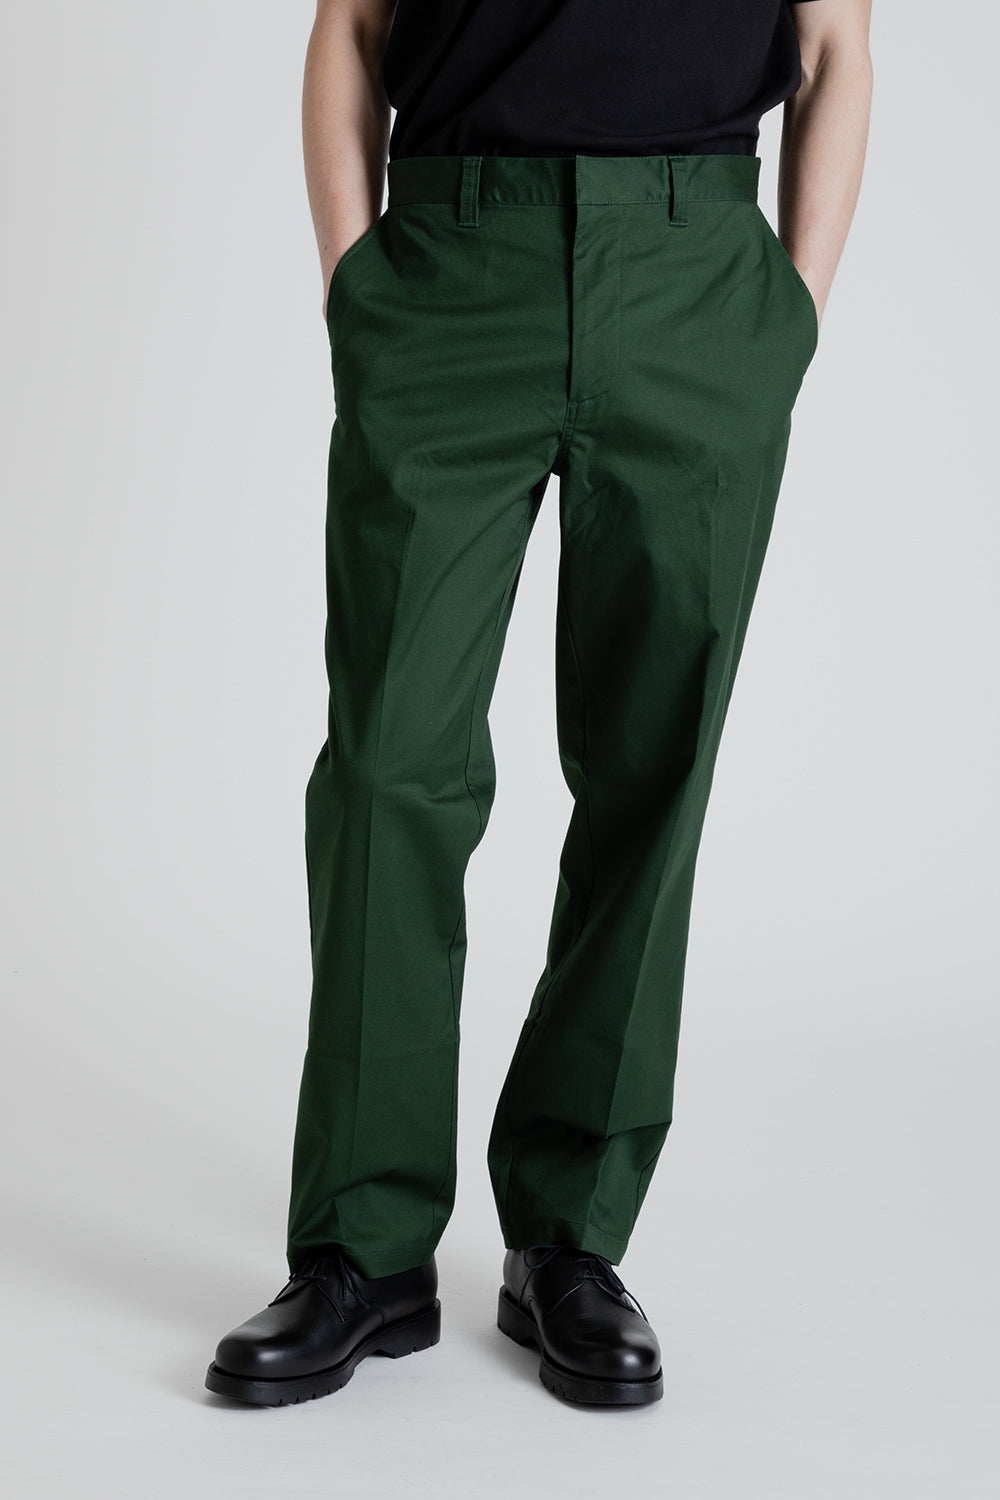 Adapture Relaxed Fit Chino Pants in Mountain View | Wallace Mercantile